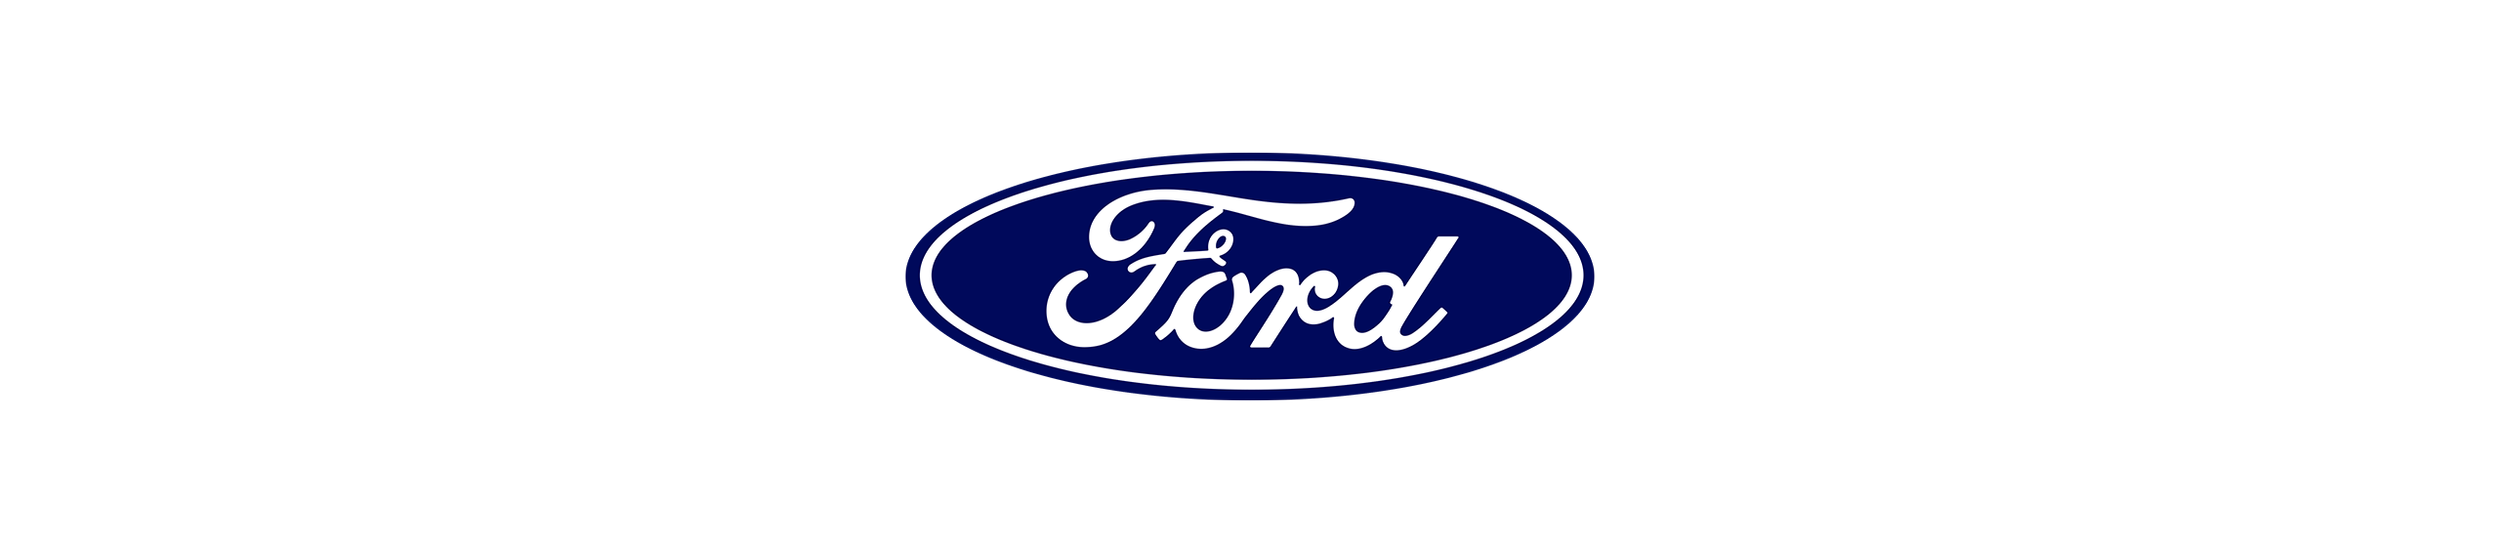 FORD-LOGO.png